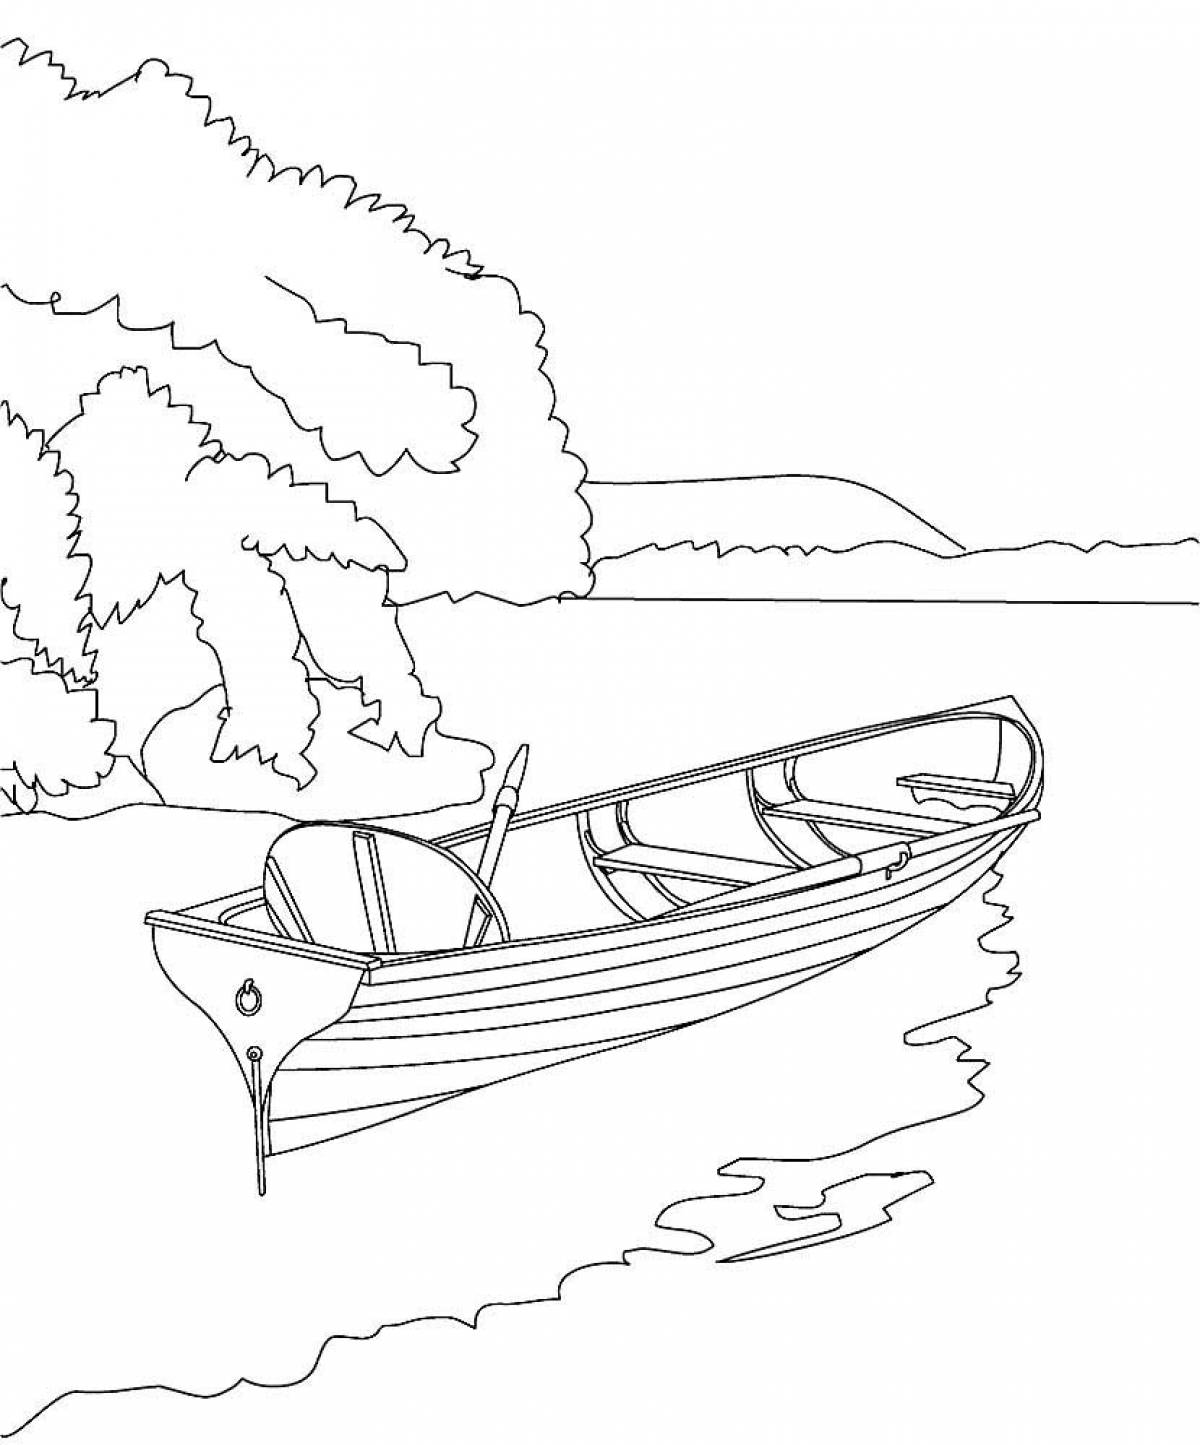 Boat on the shore